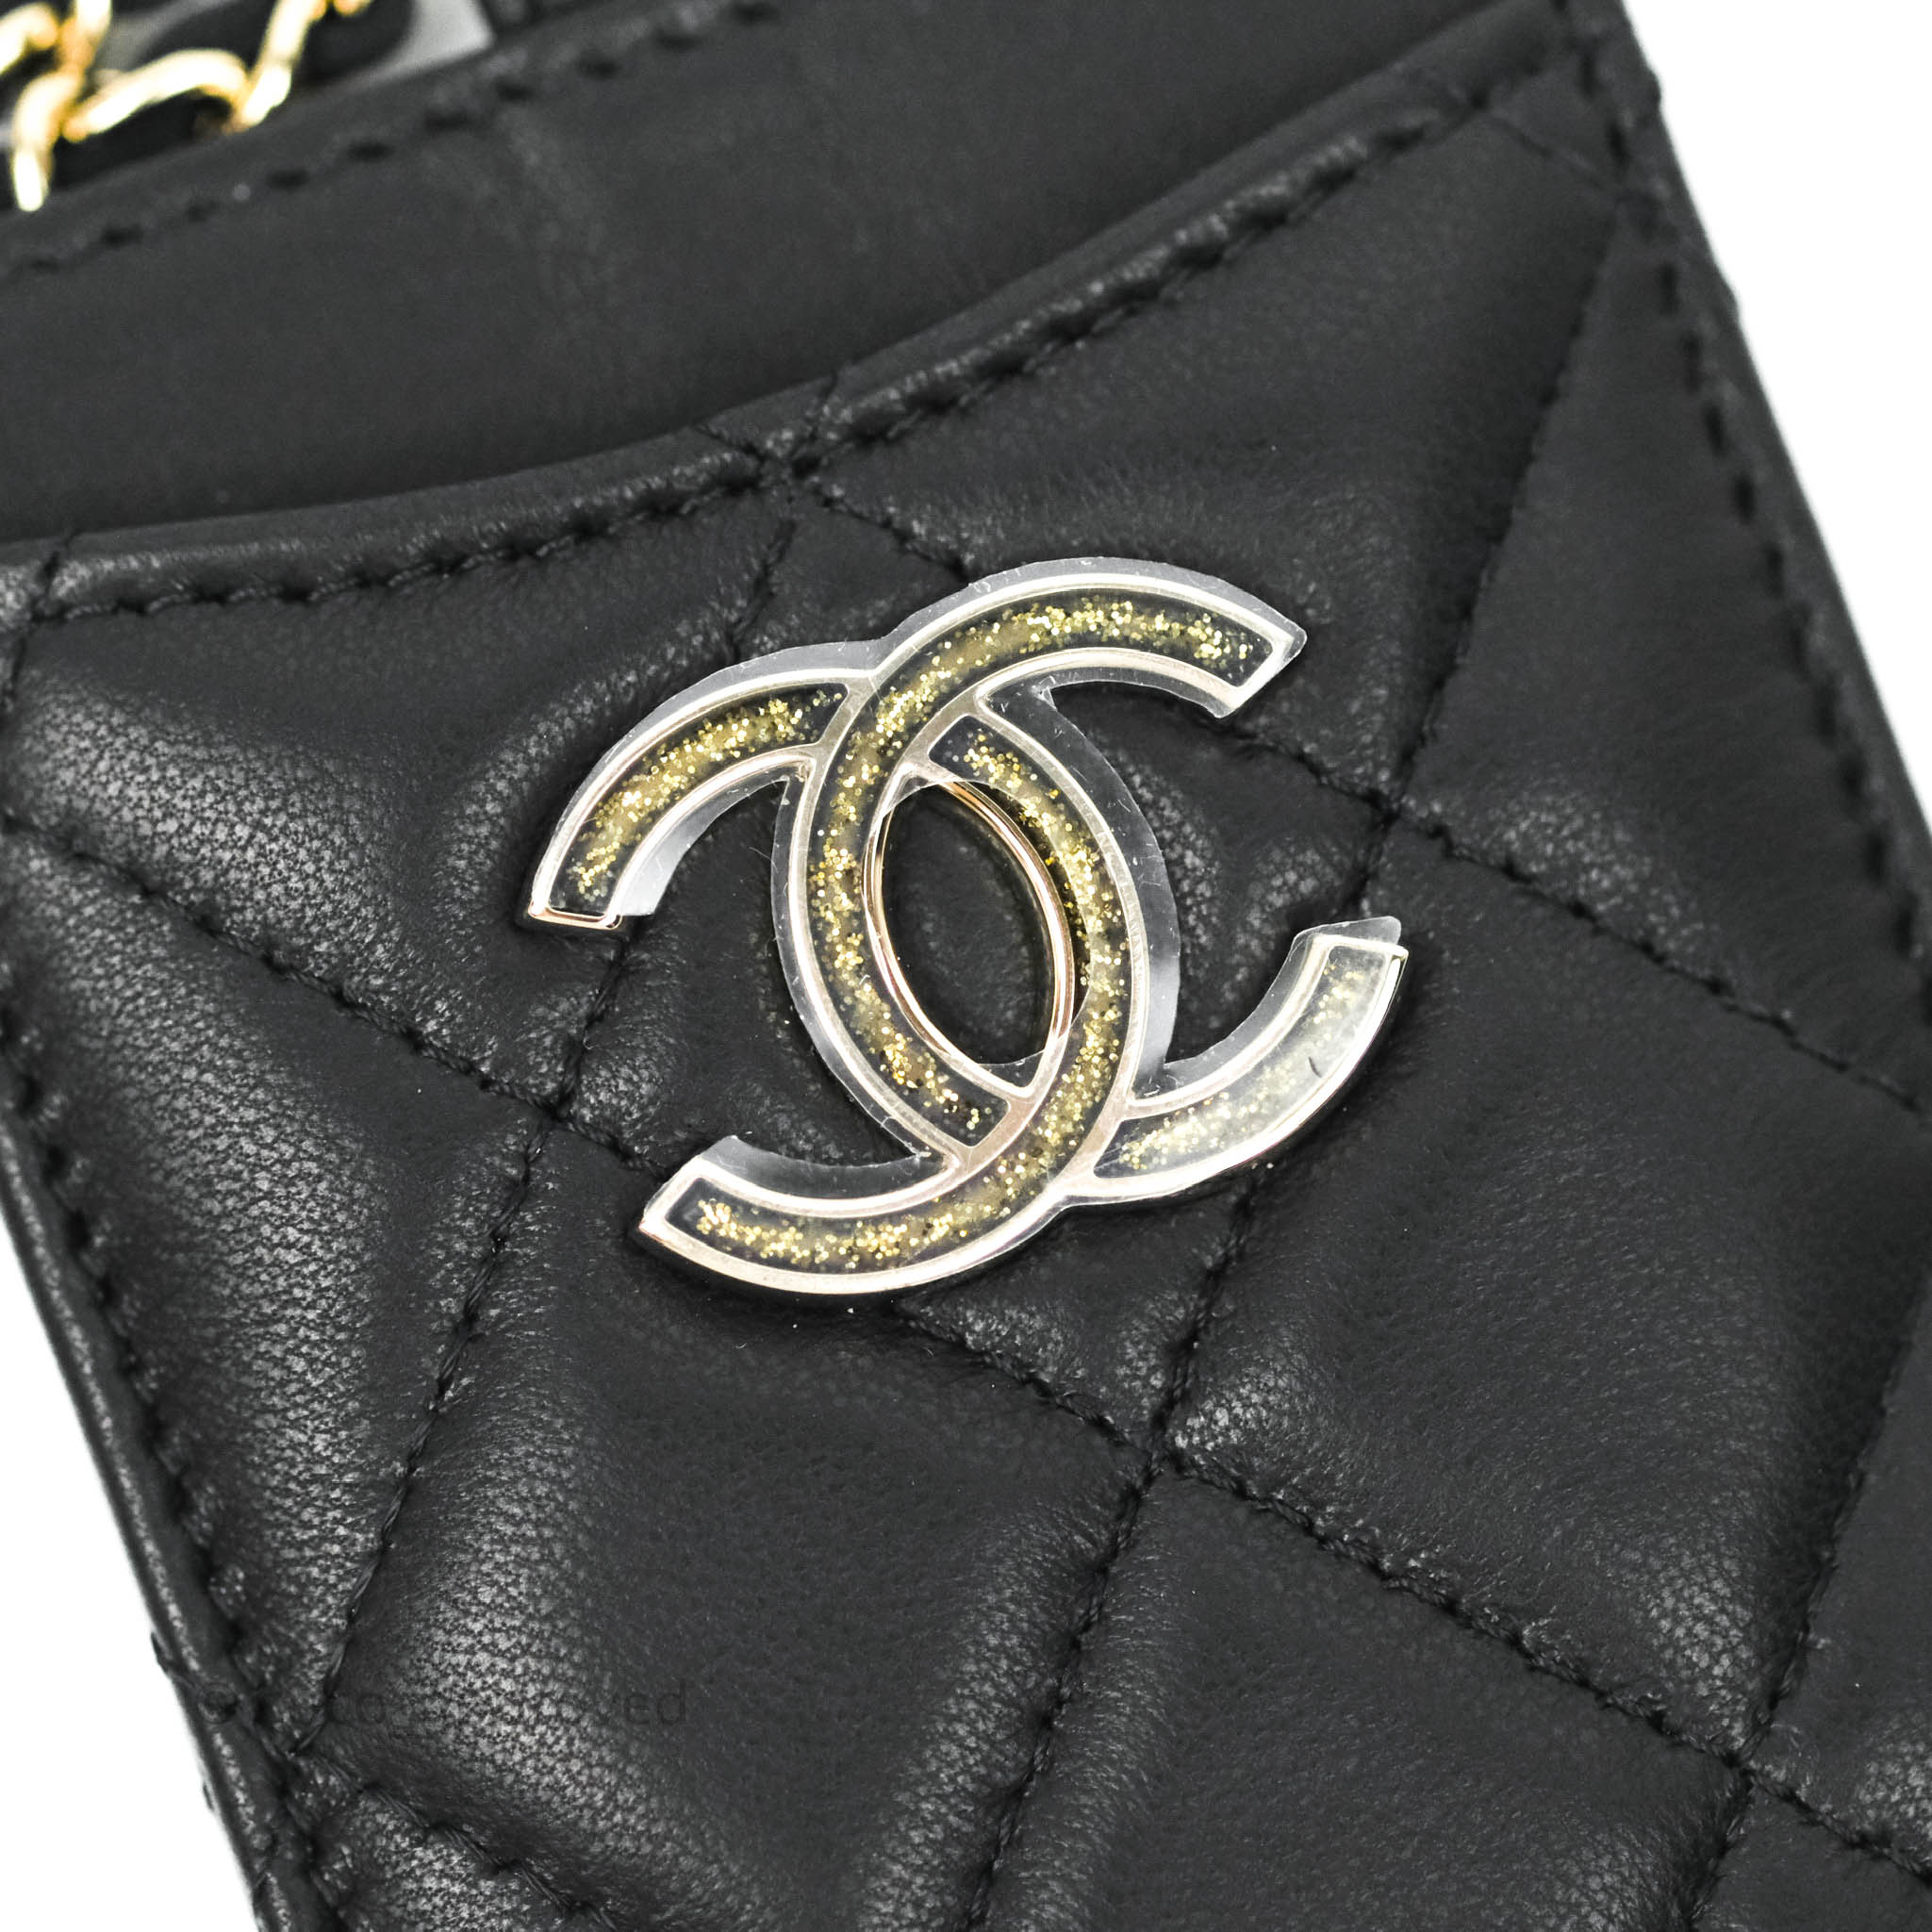 CHANEL Lambskin Quilted Card Holder Black 1255078